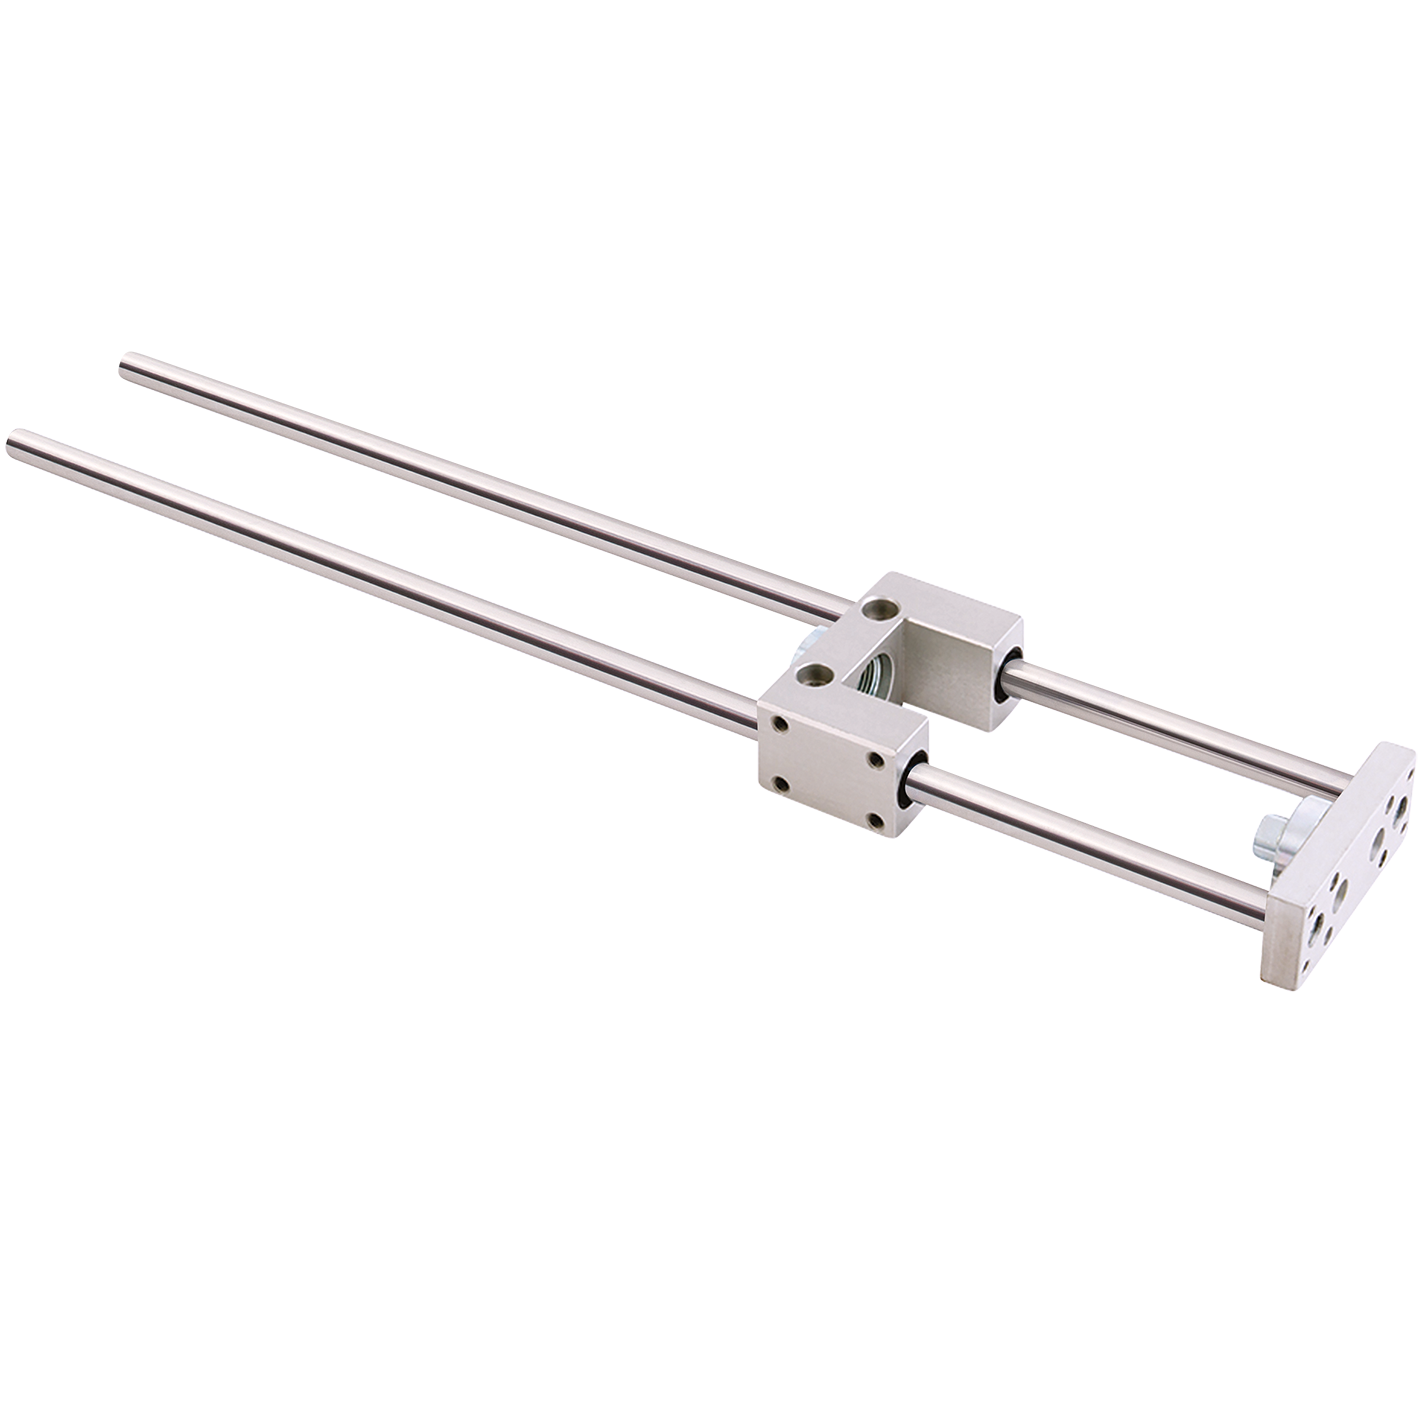 50mm Bore x 320mm Stroke Cylinder Guide Unit